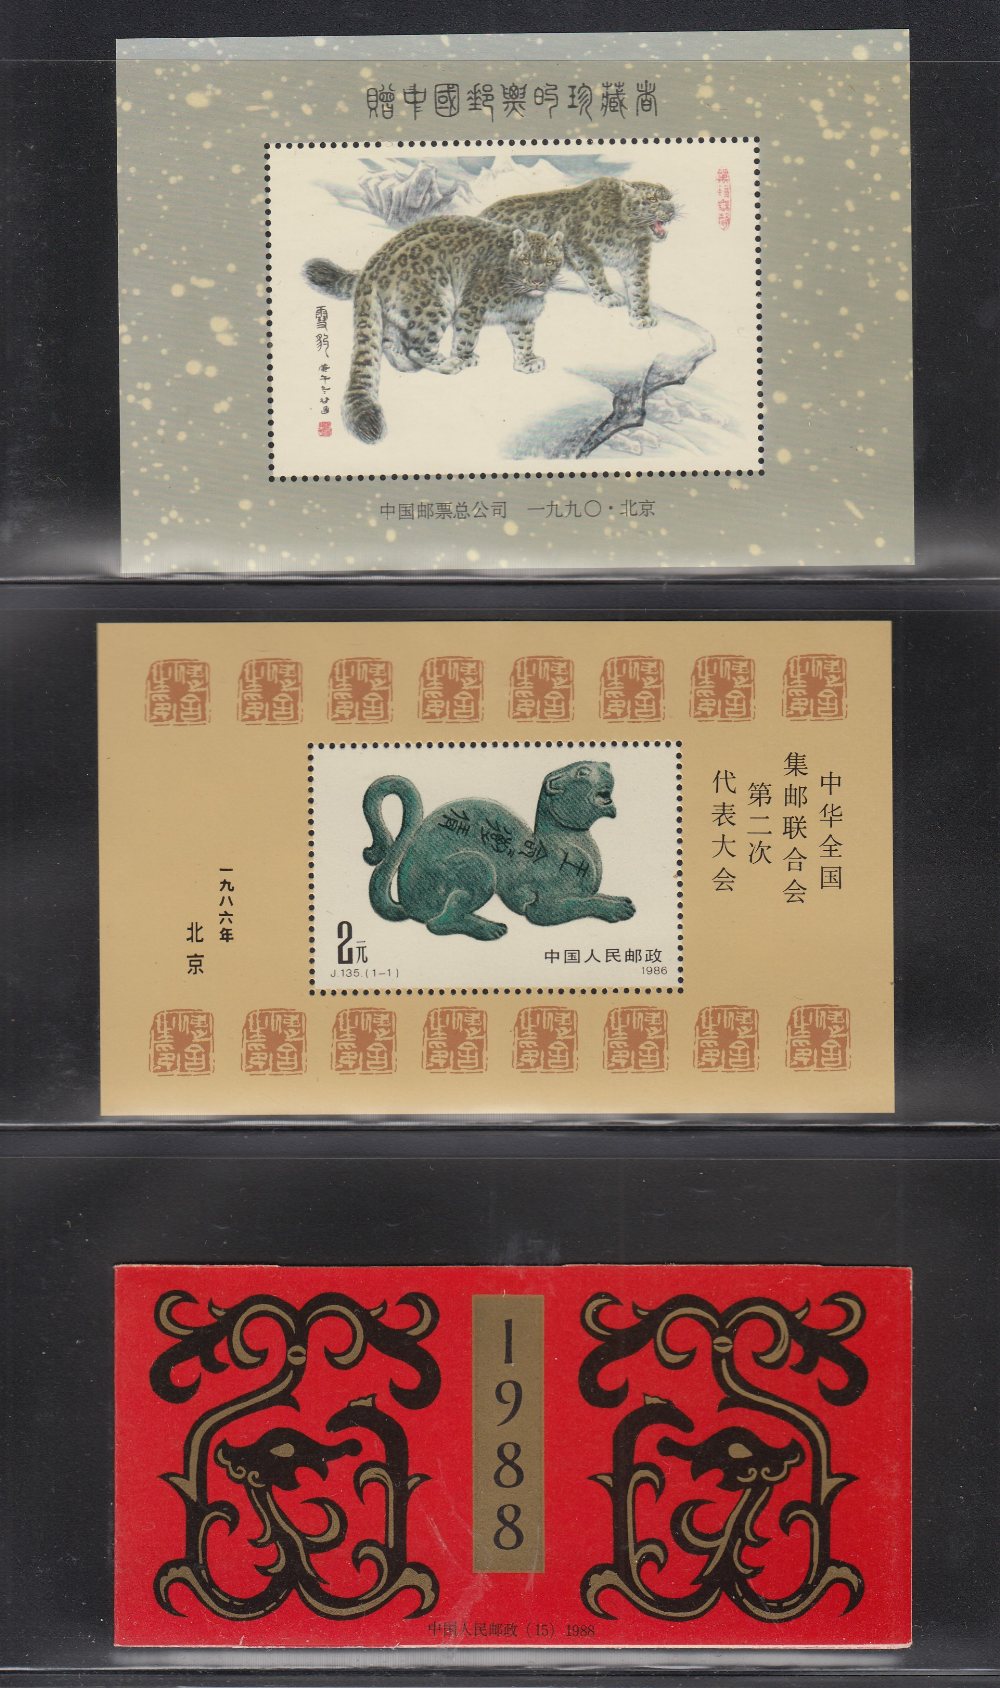 STAMPS CHINA Album of Chinese stamps and covers mainly 1980's and 90's period includes some - Image 4 of 5